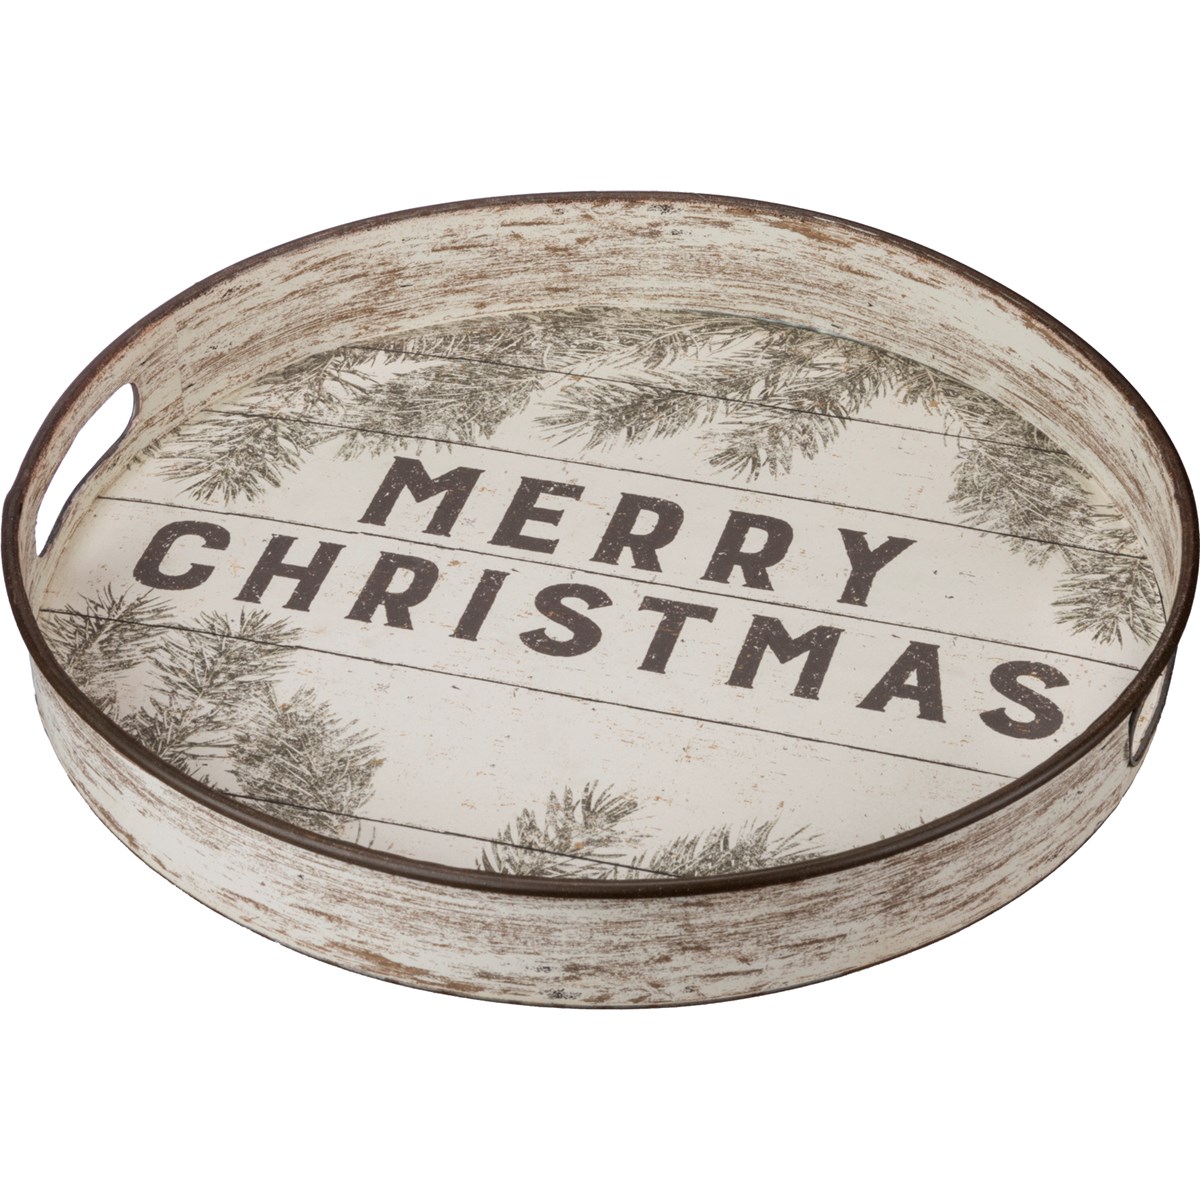 Merry Christmas Rustic Tray - Metal, Paper